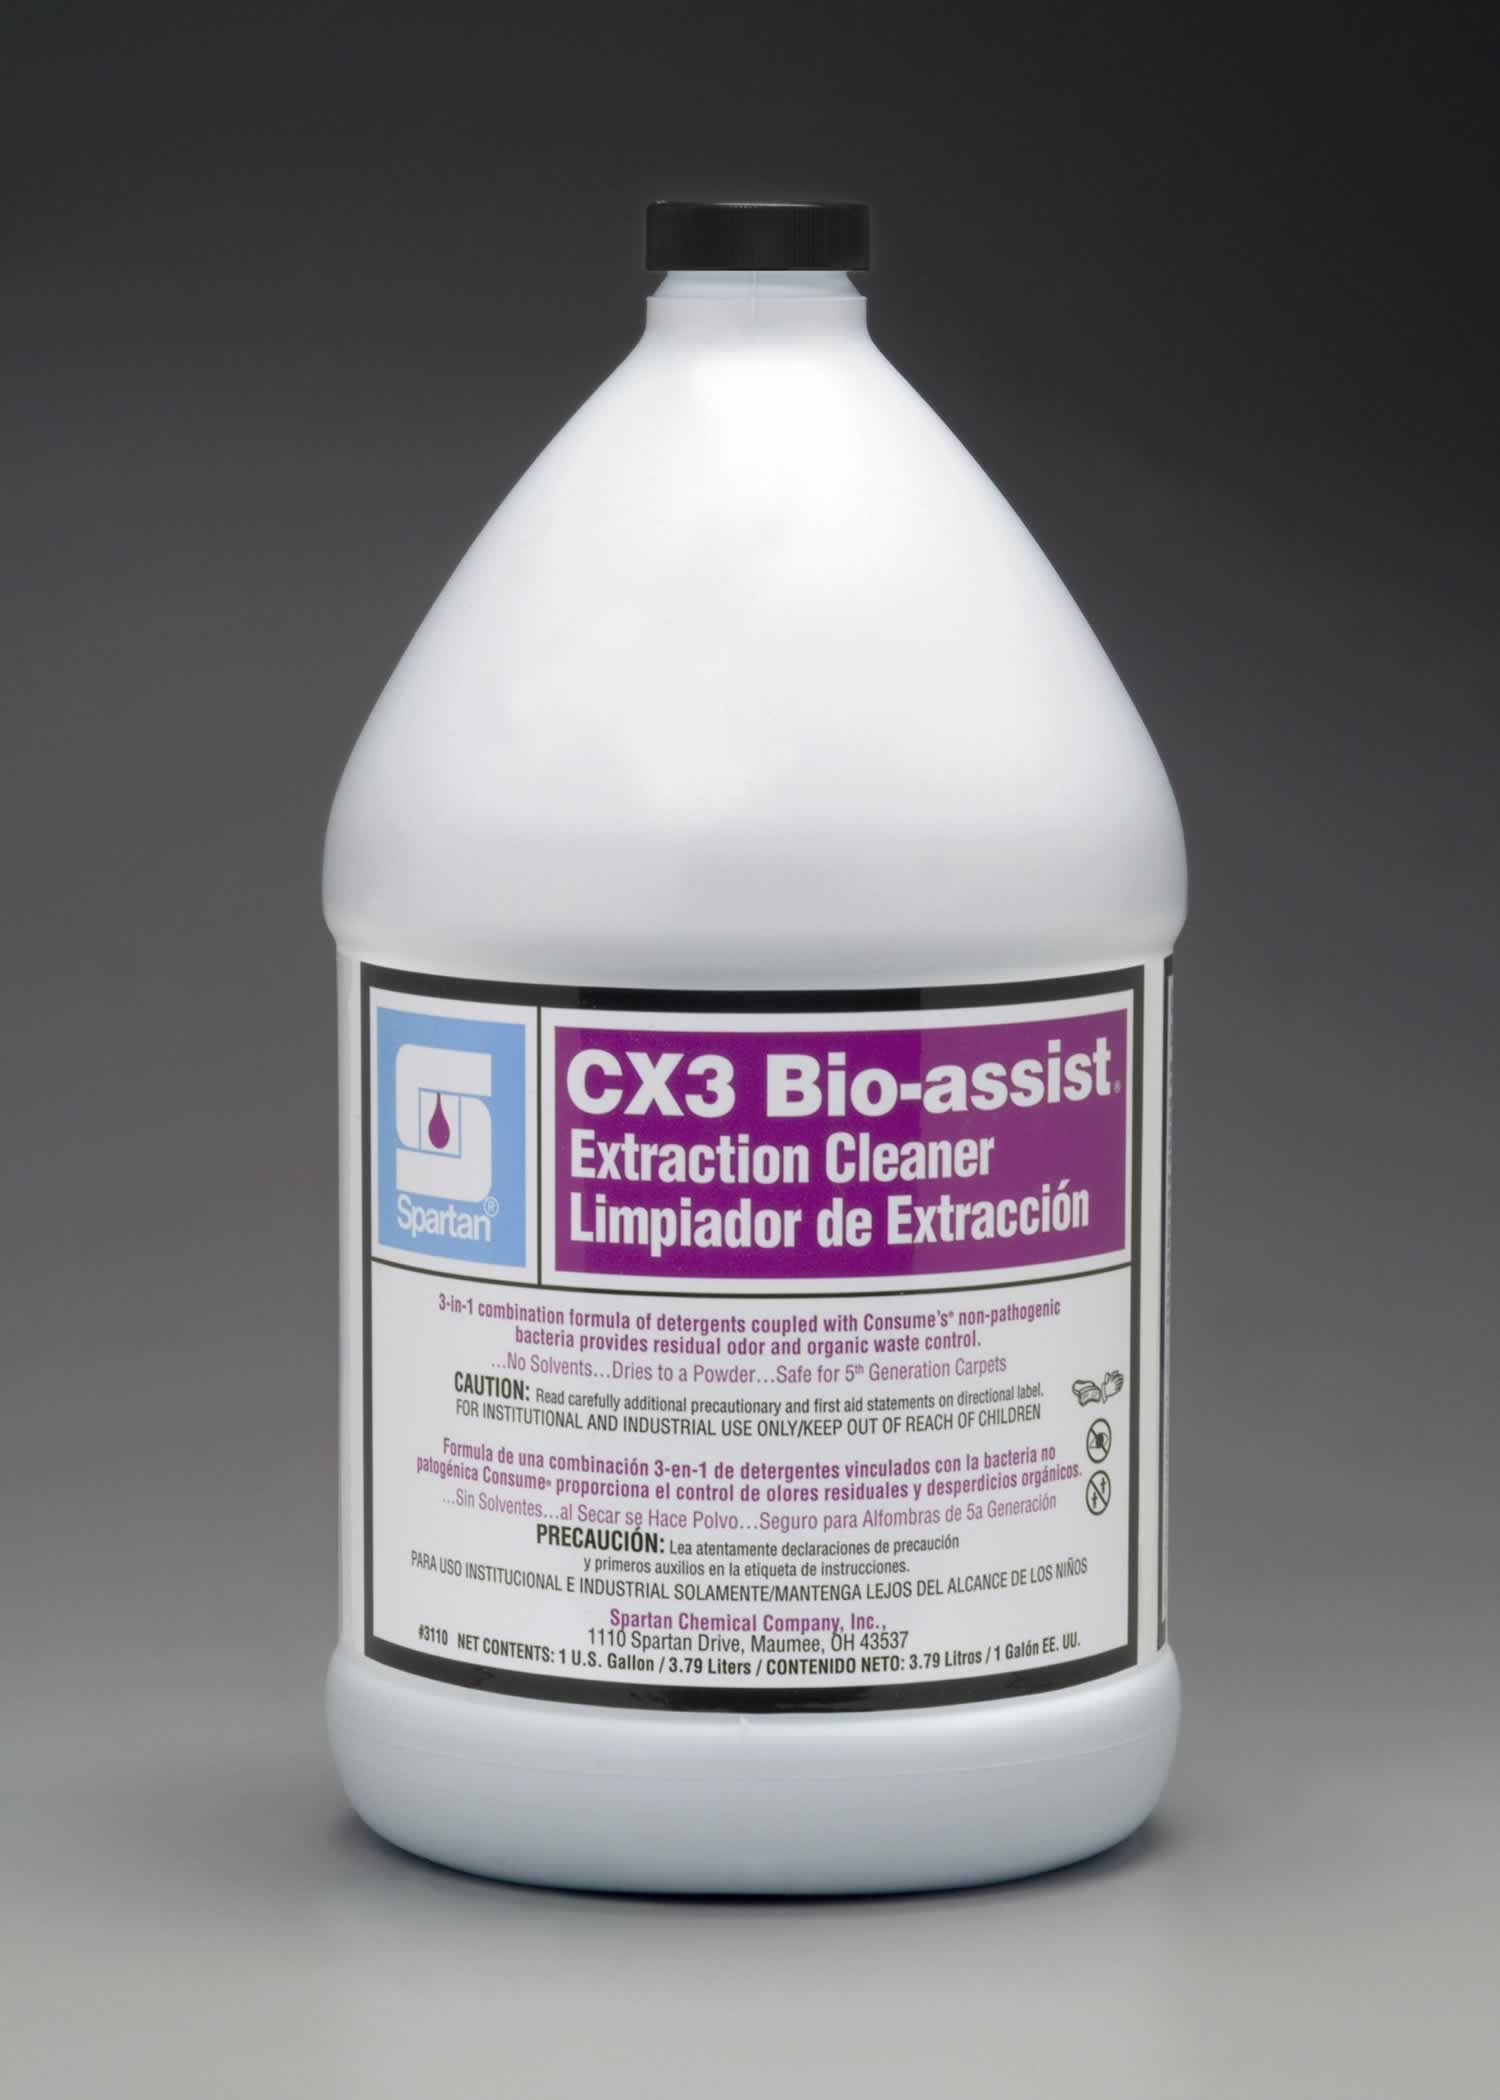 CX-3 Bio-Assist-Extraction cleaner that digests bacteria and non-pathogenic microorganisms